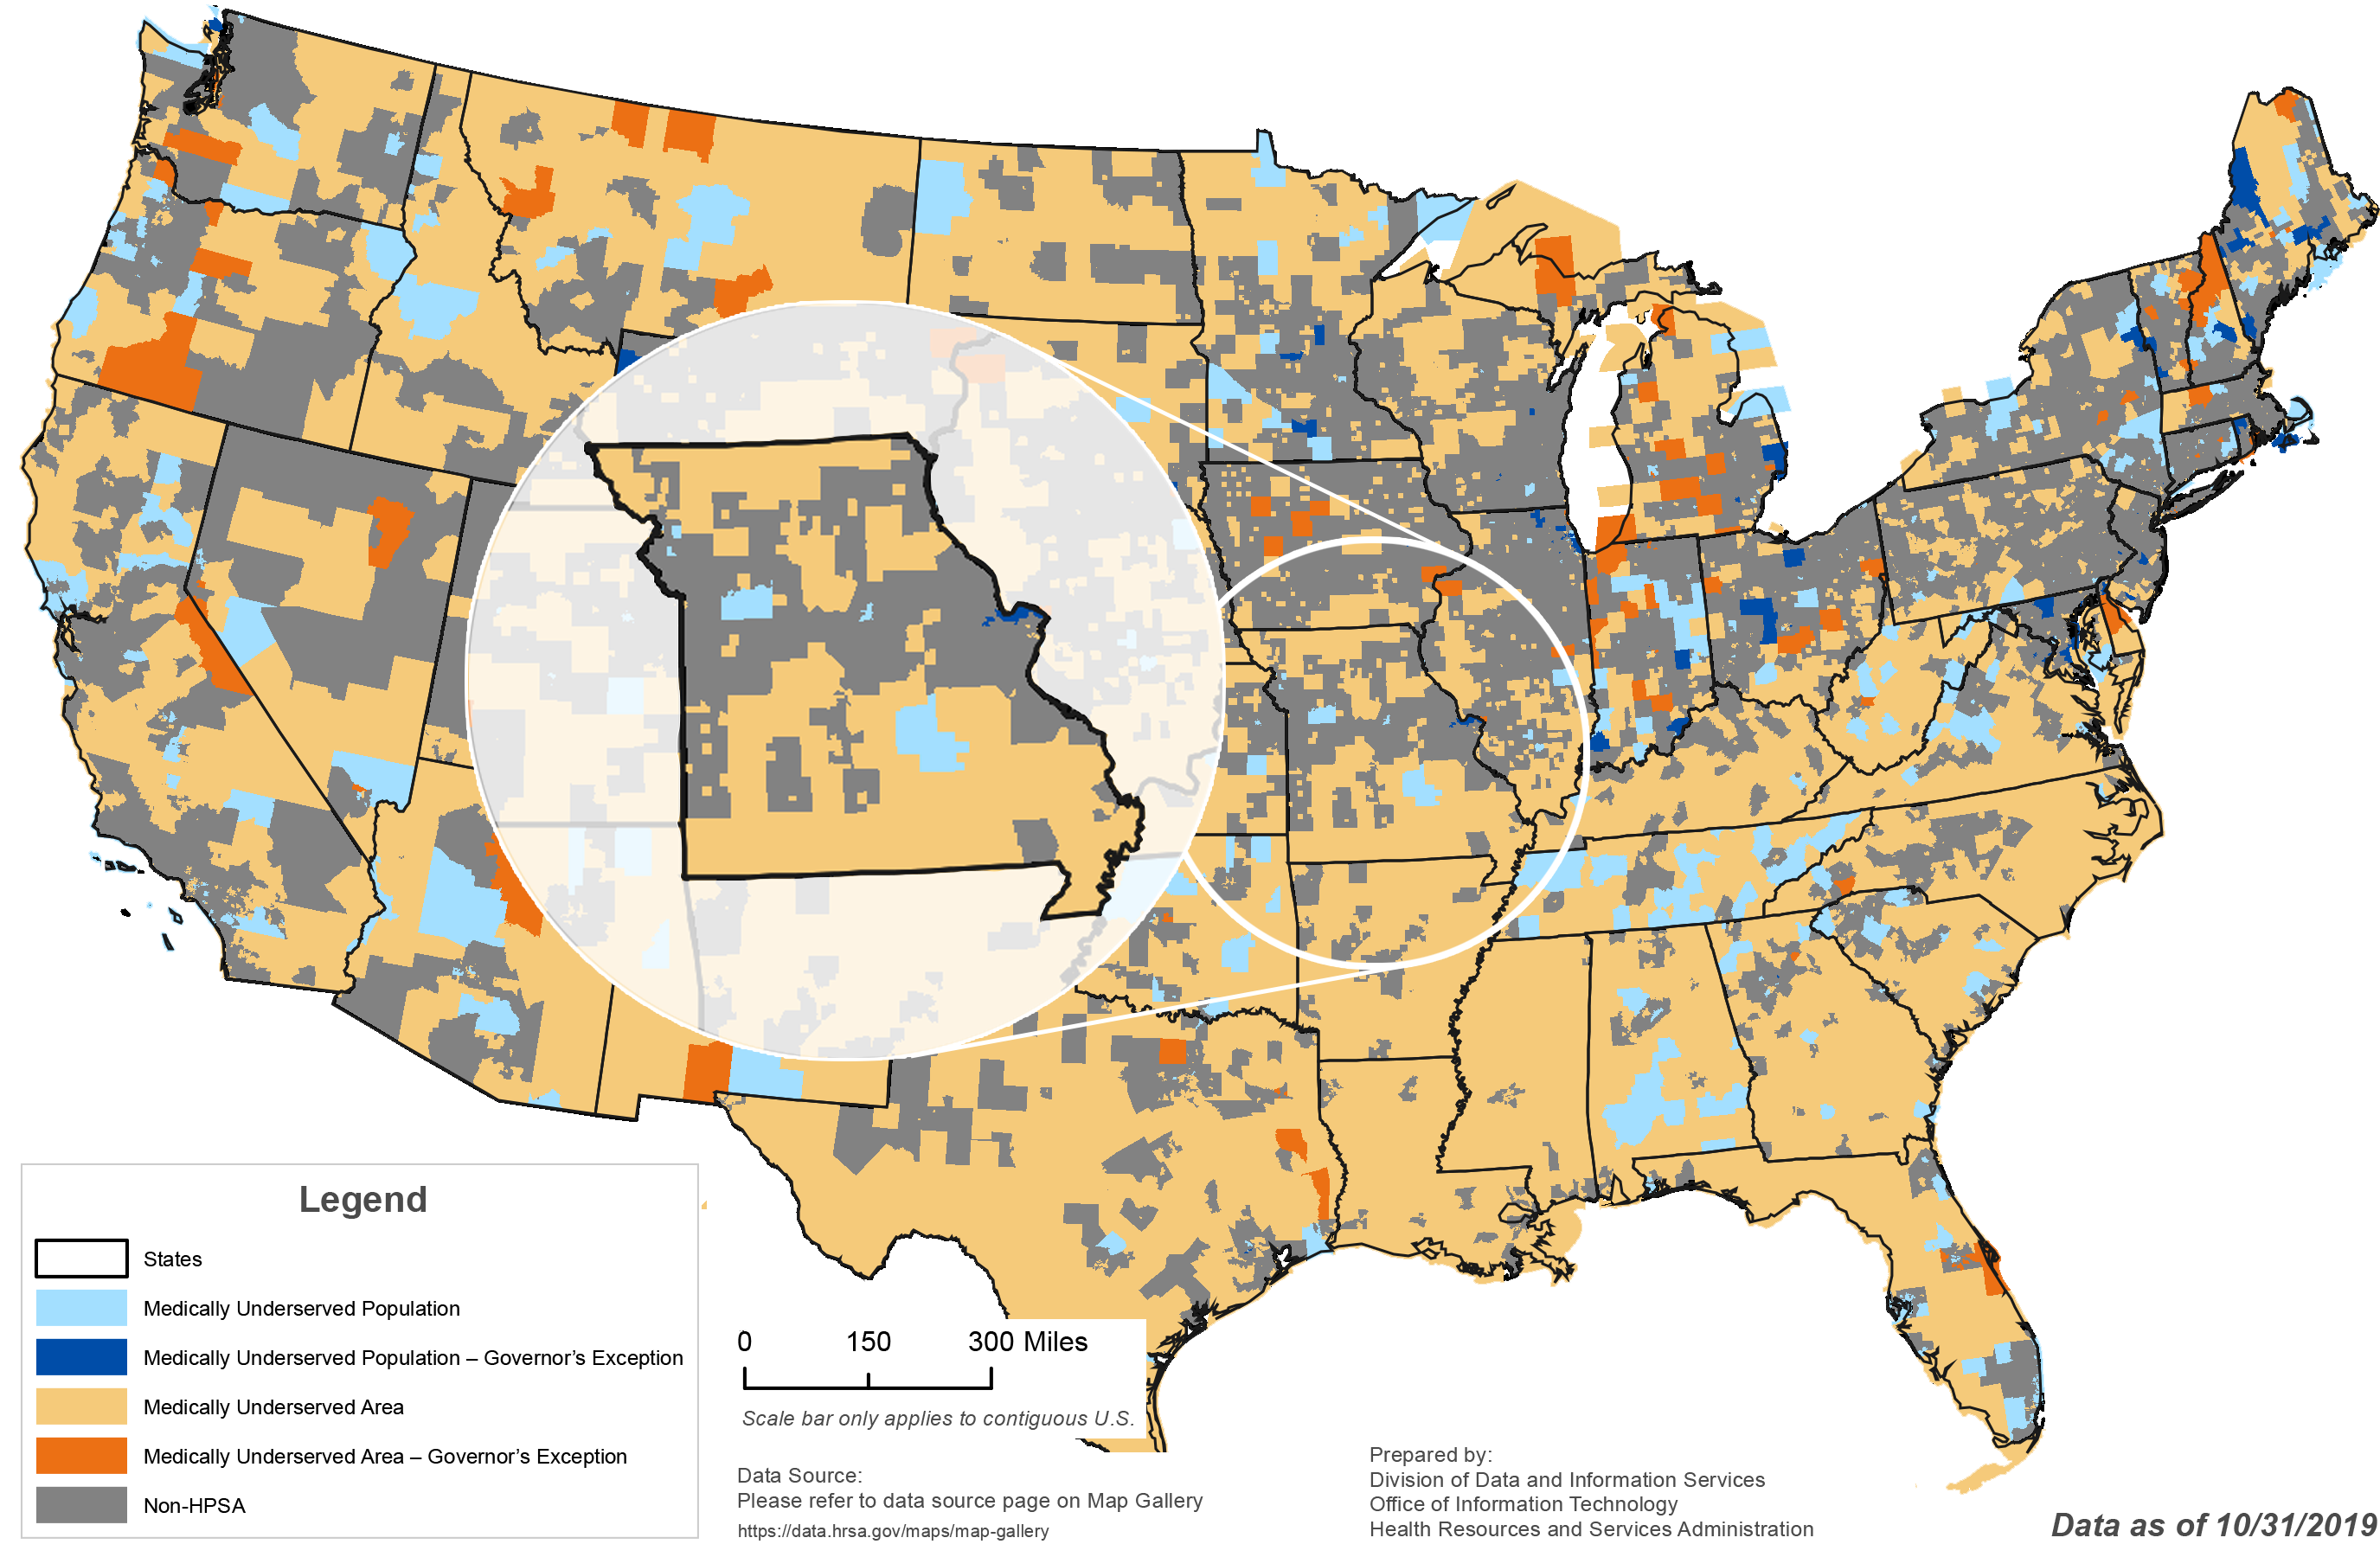 Medically Underserved Areas / Populations